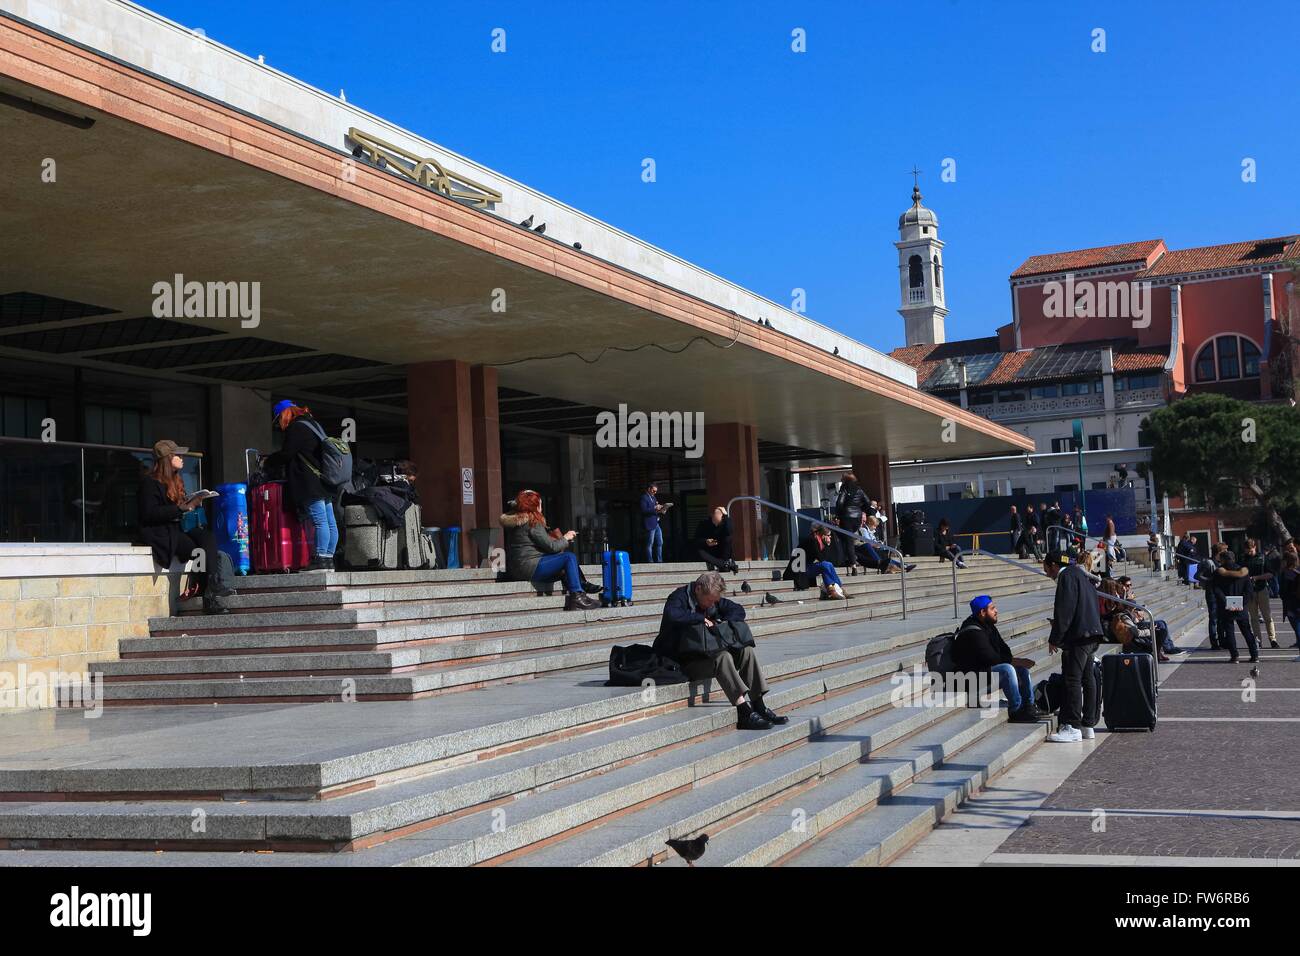 Venice Santa Lucia railway station building. The station is one of Venice's two most important railway stations, Stock Photo